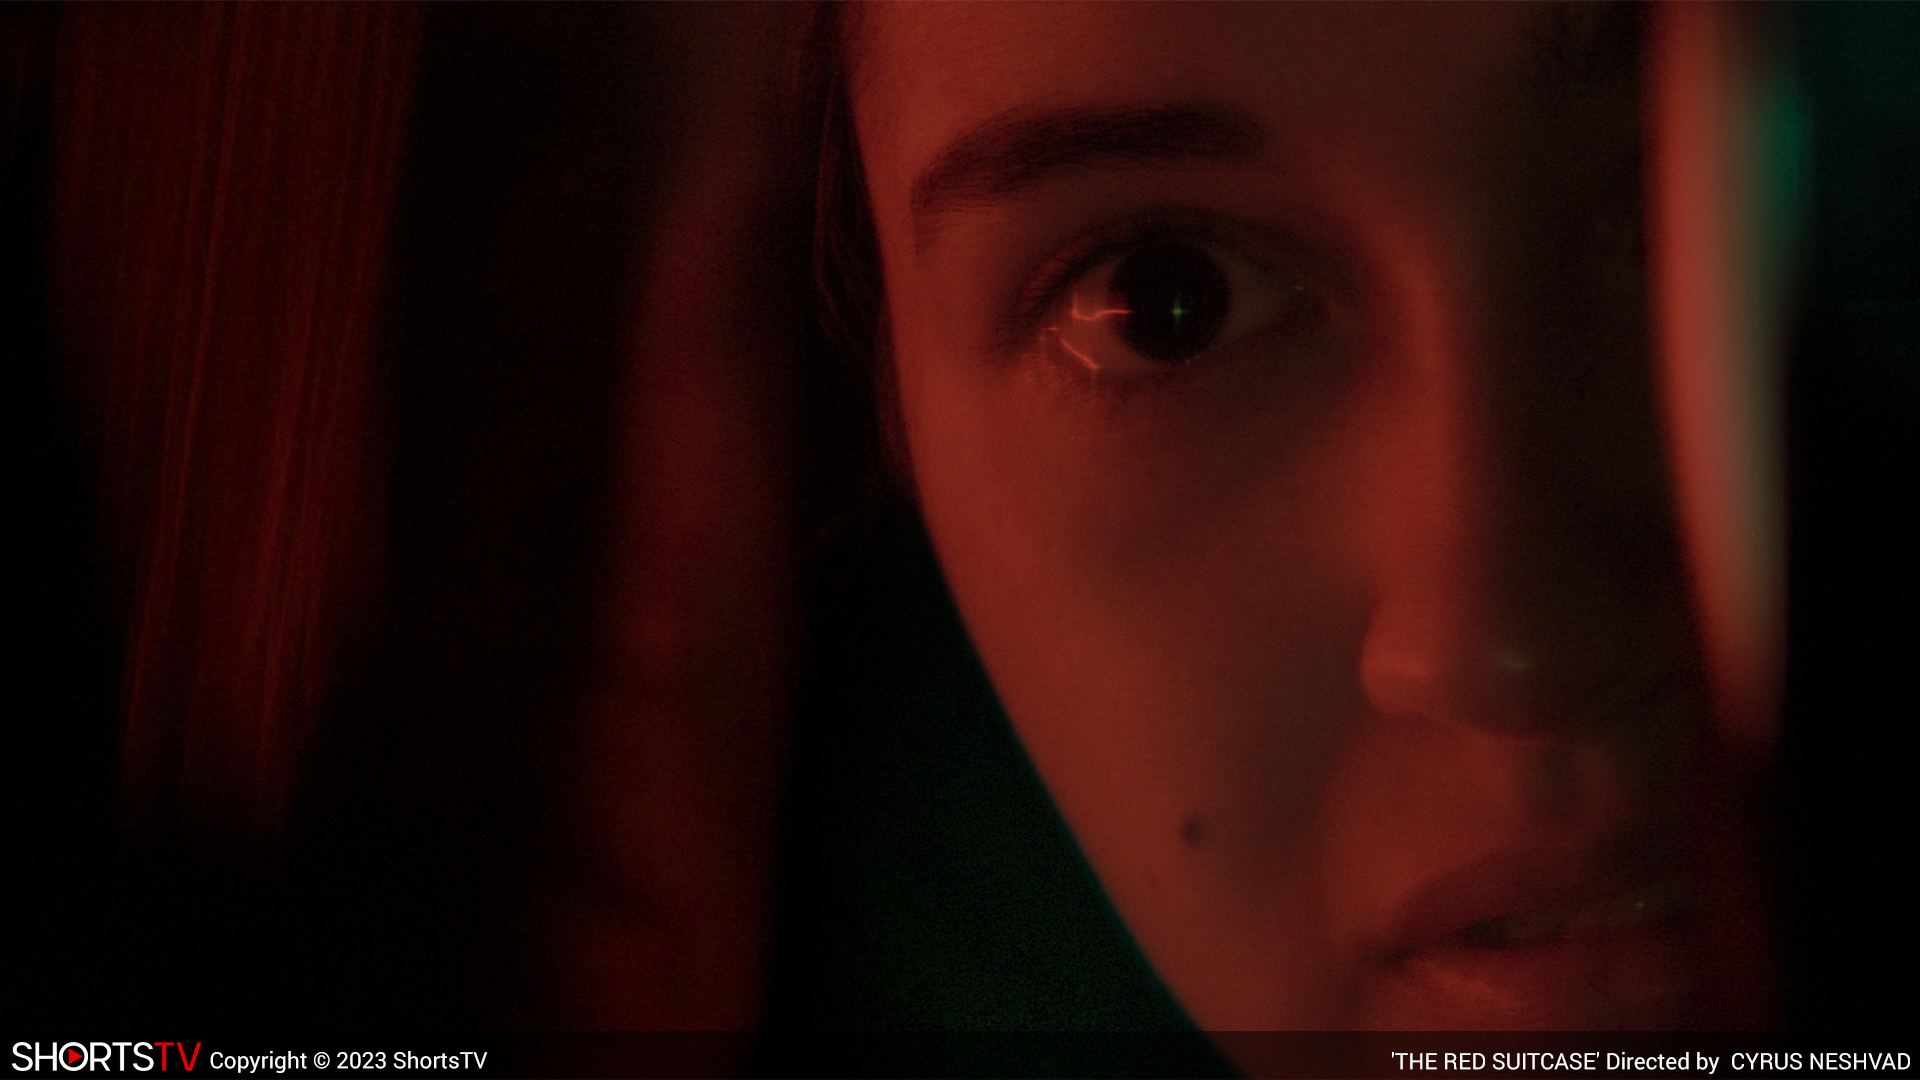 Still from the short film THE RED SUITCASE (2022)